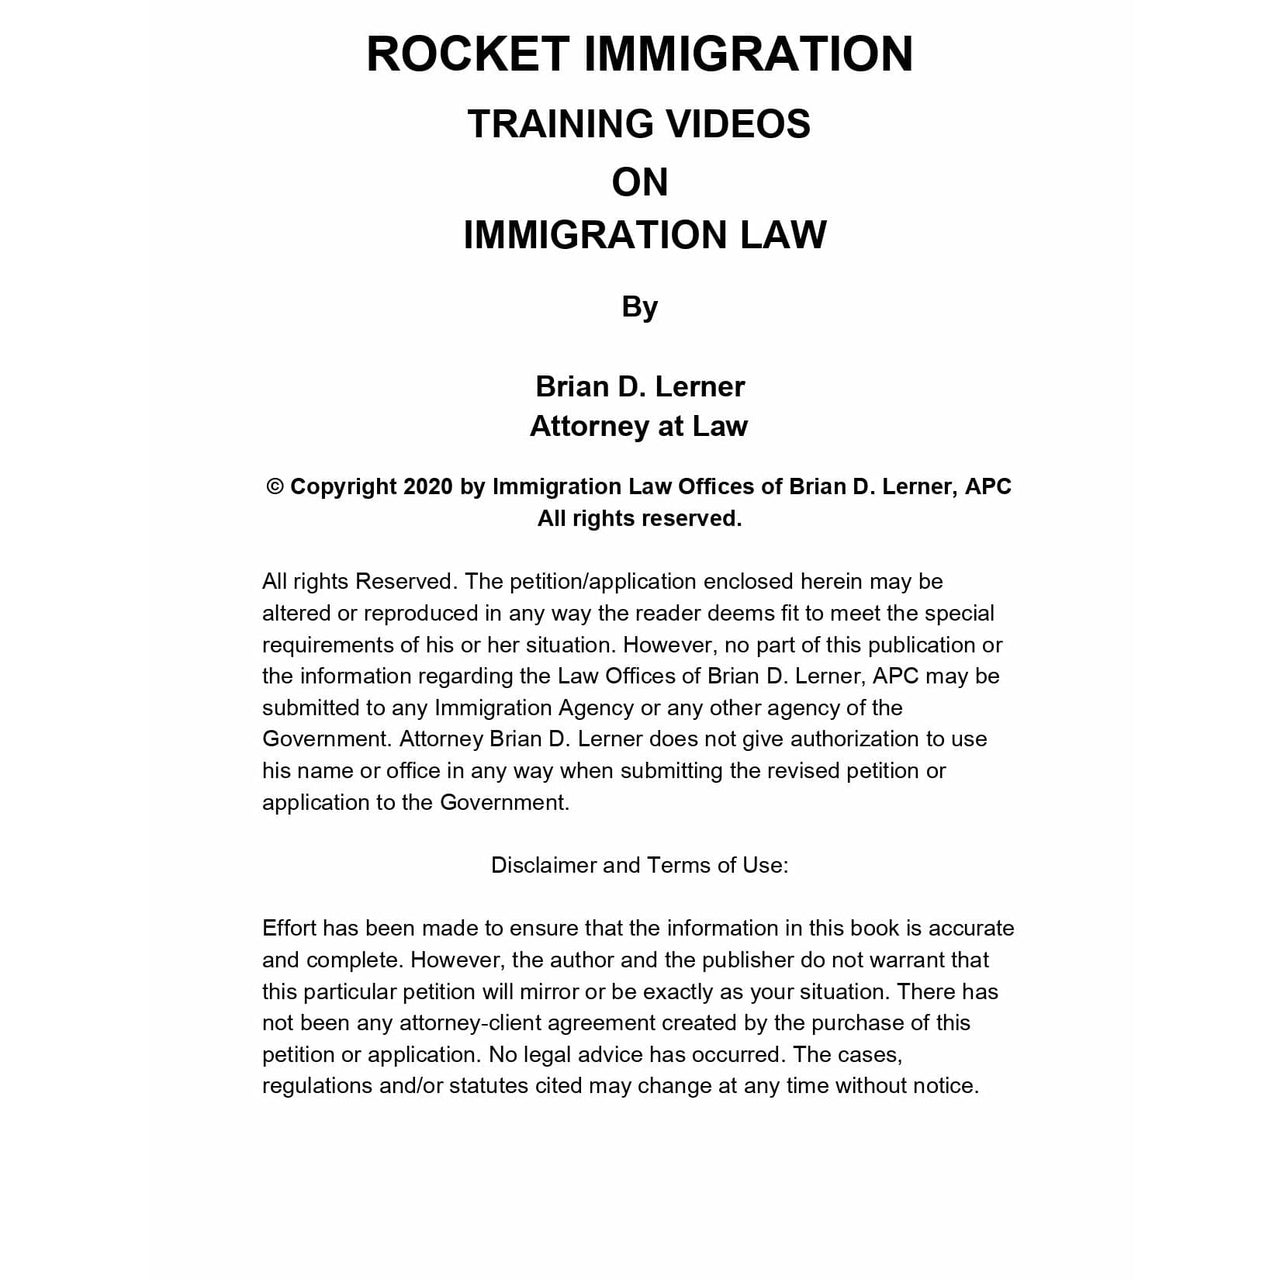 Criminal Waiver Training Course Access Packet - Rocket Immigration Petitions